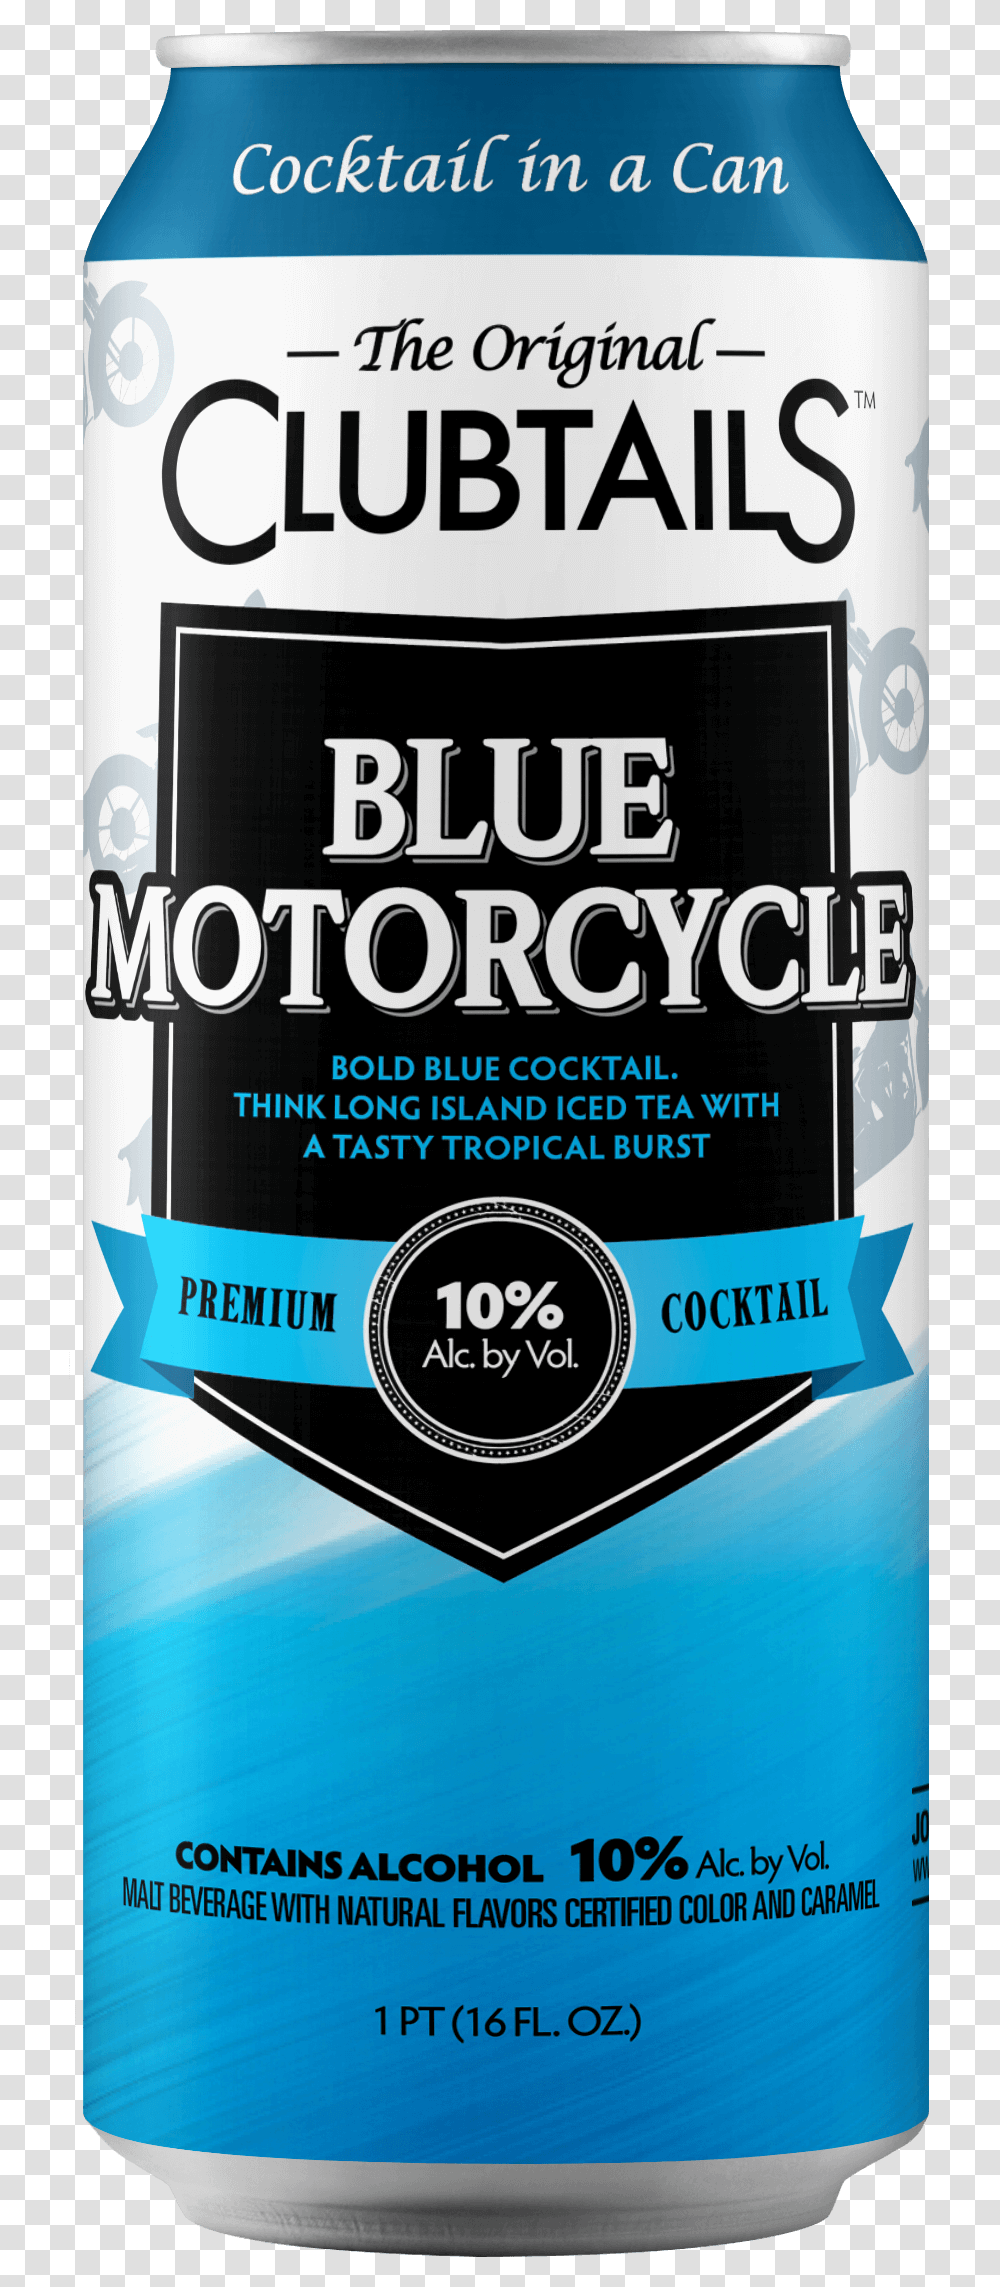 Blue Motorcycle Club Cocktails In A Can, Alcohol, Beverage, Liquor, Tin Transparent Png